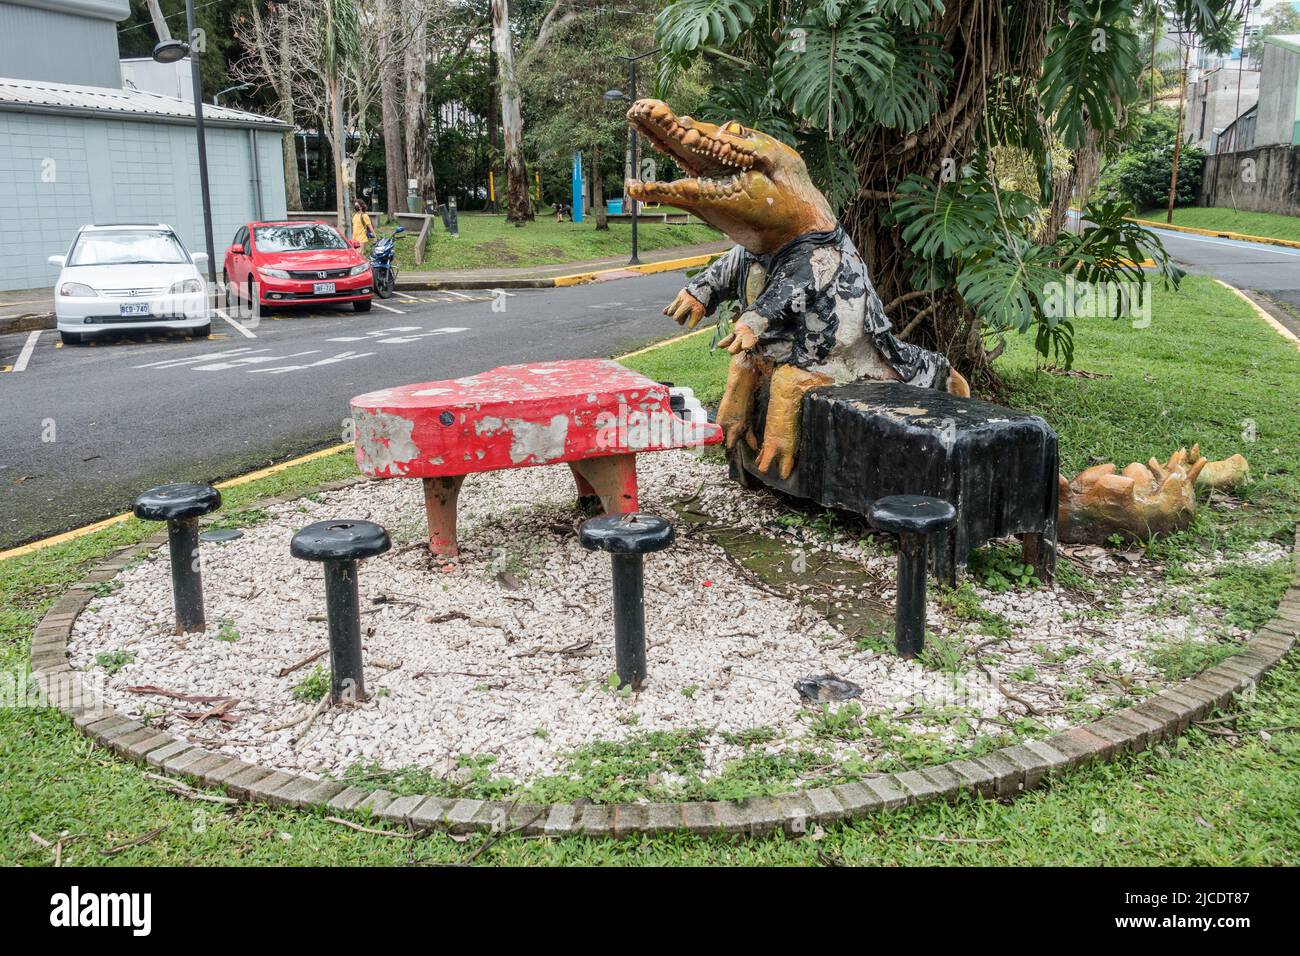 Unusual sculpture on the San Pedro campus of the University of Costa Rica. Stock Photo